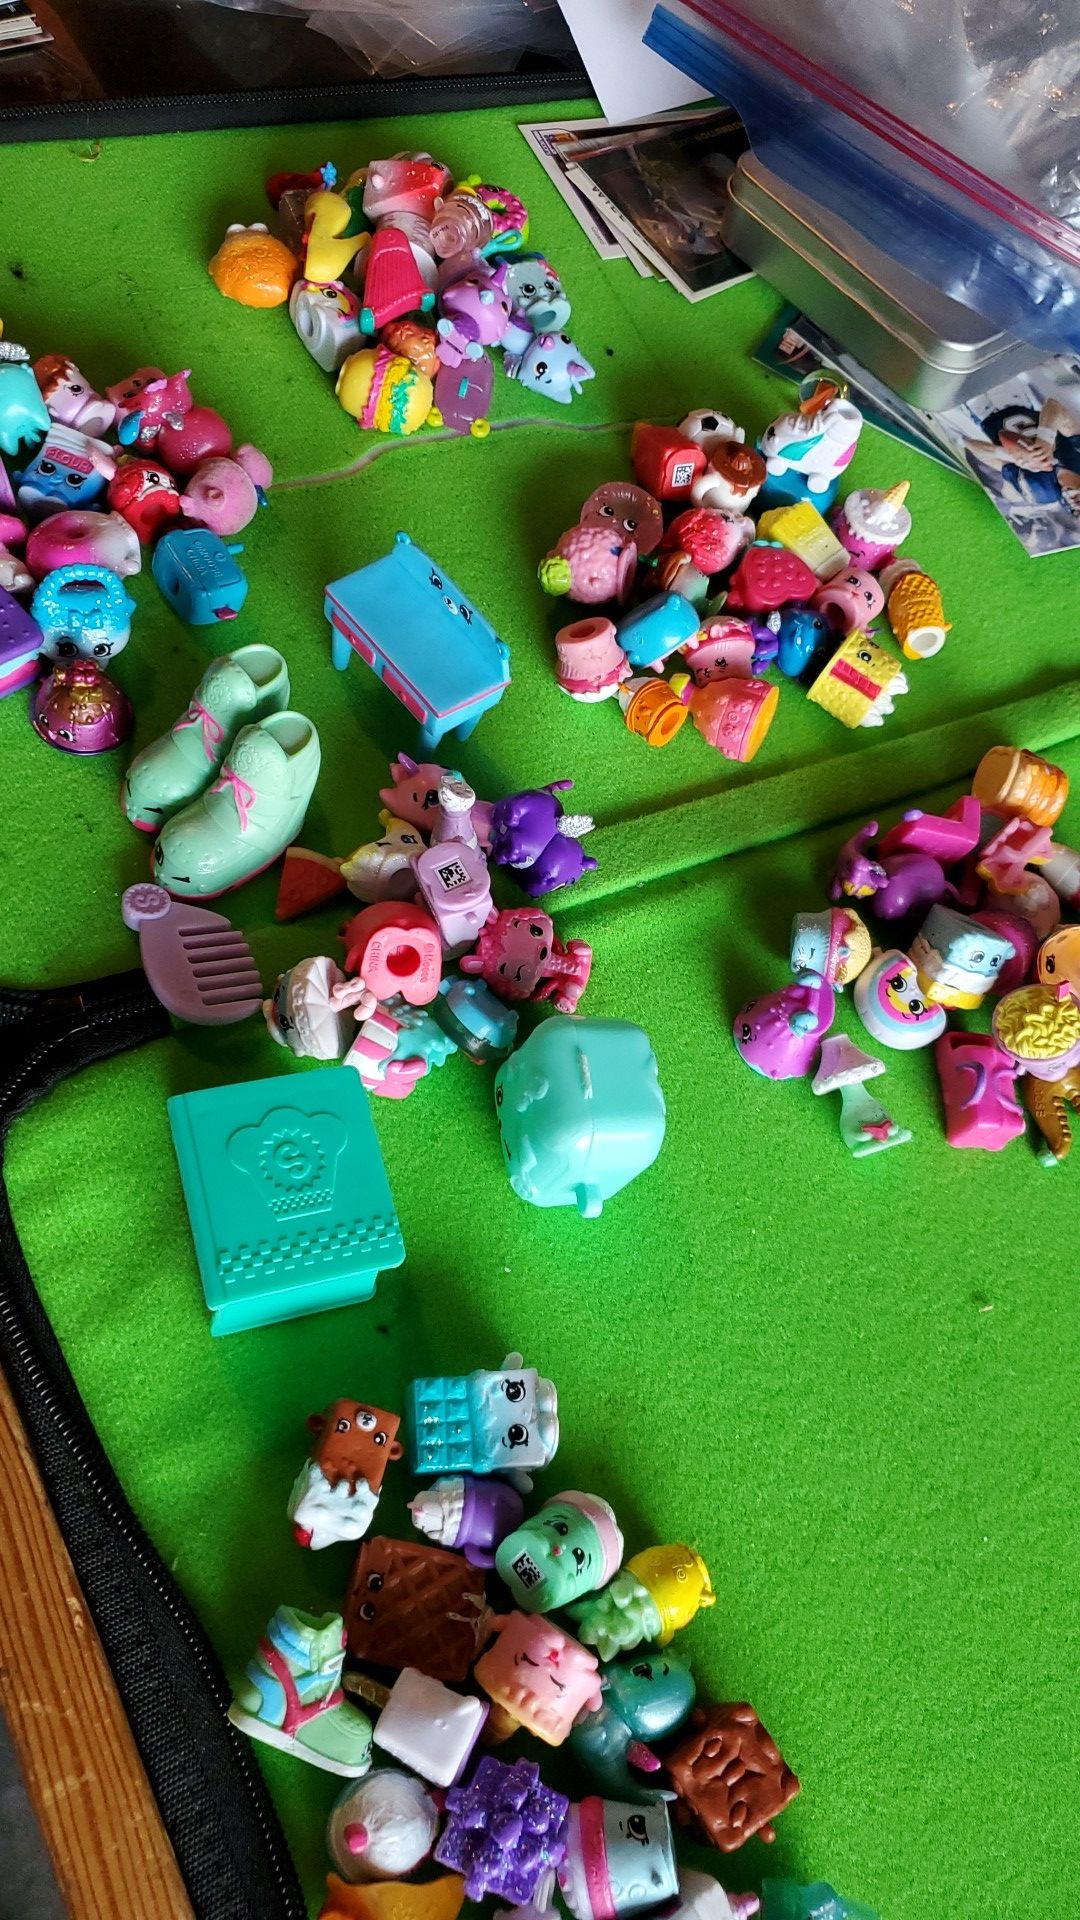 Over 100 shopkins loose toys ALL FOR $30